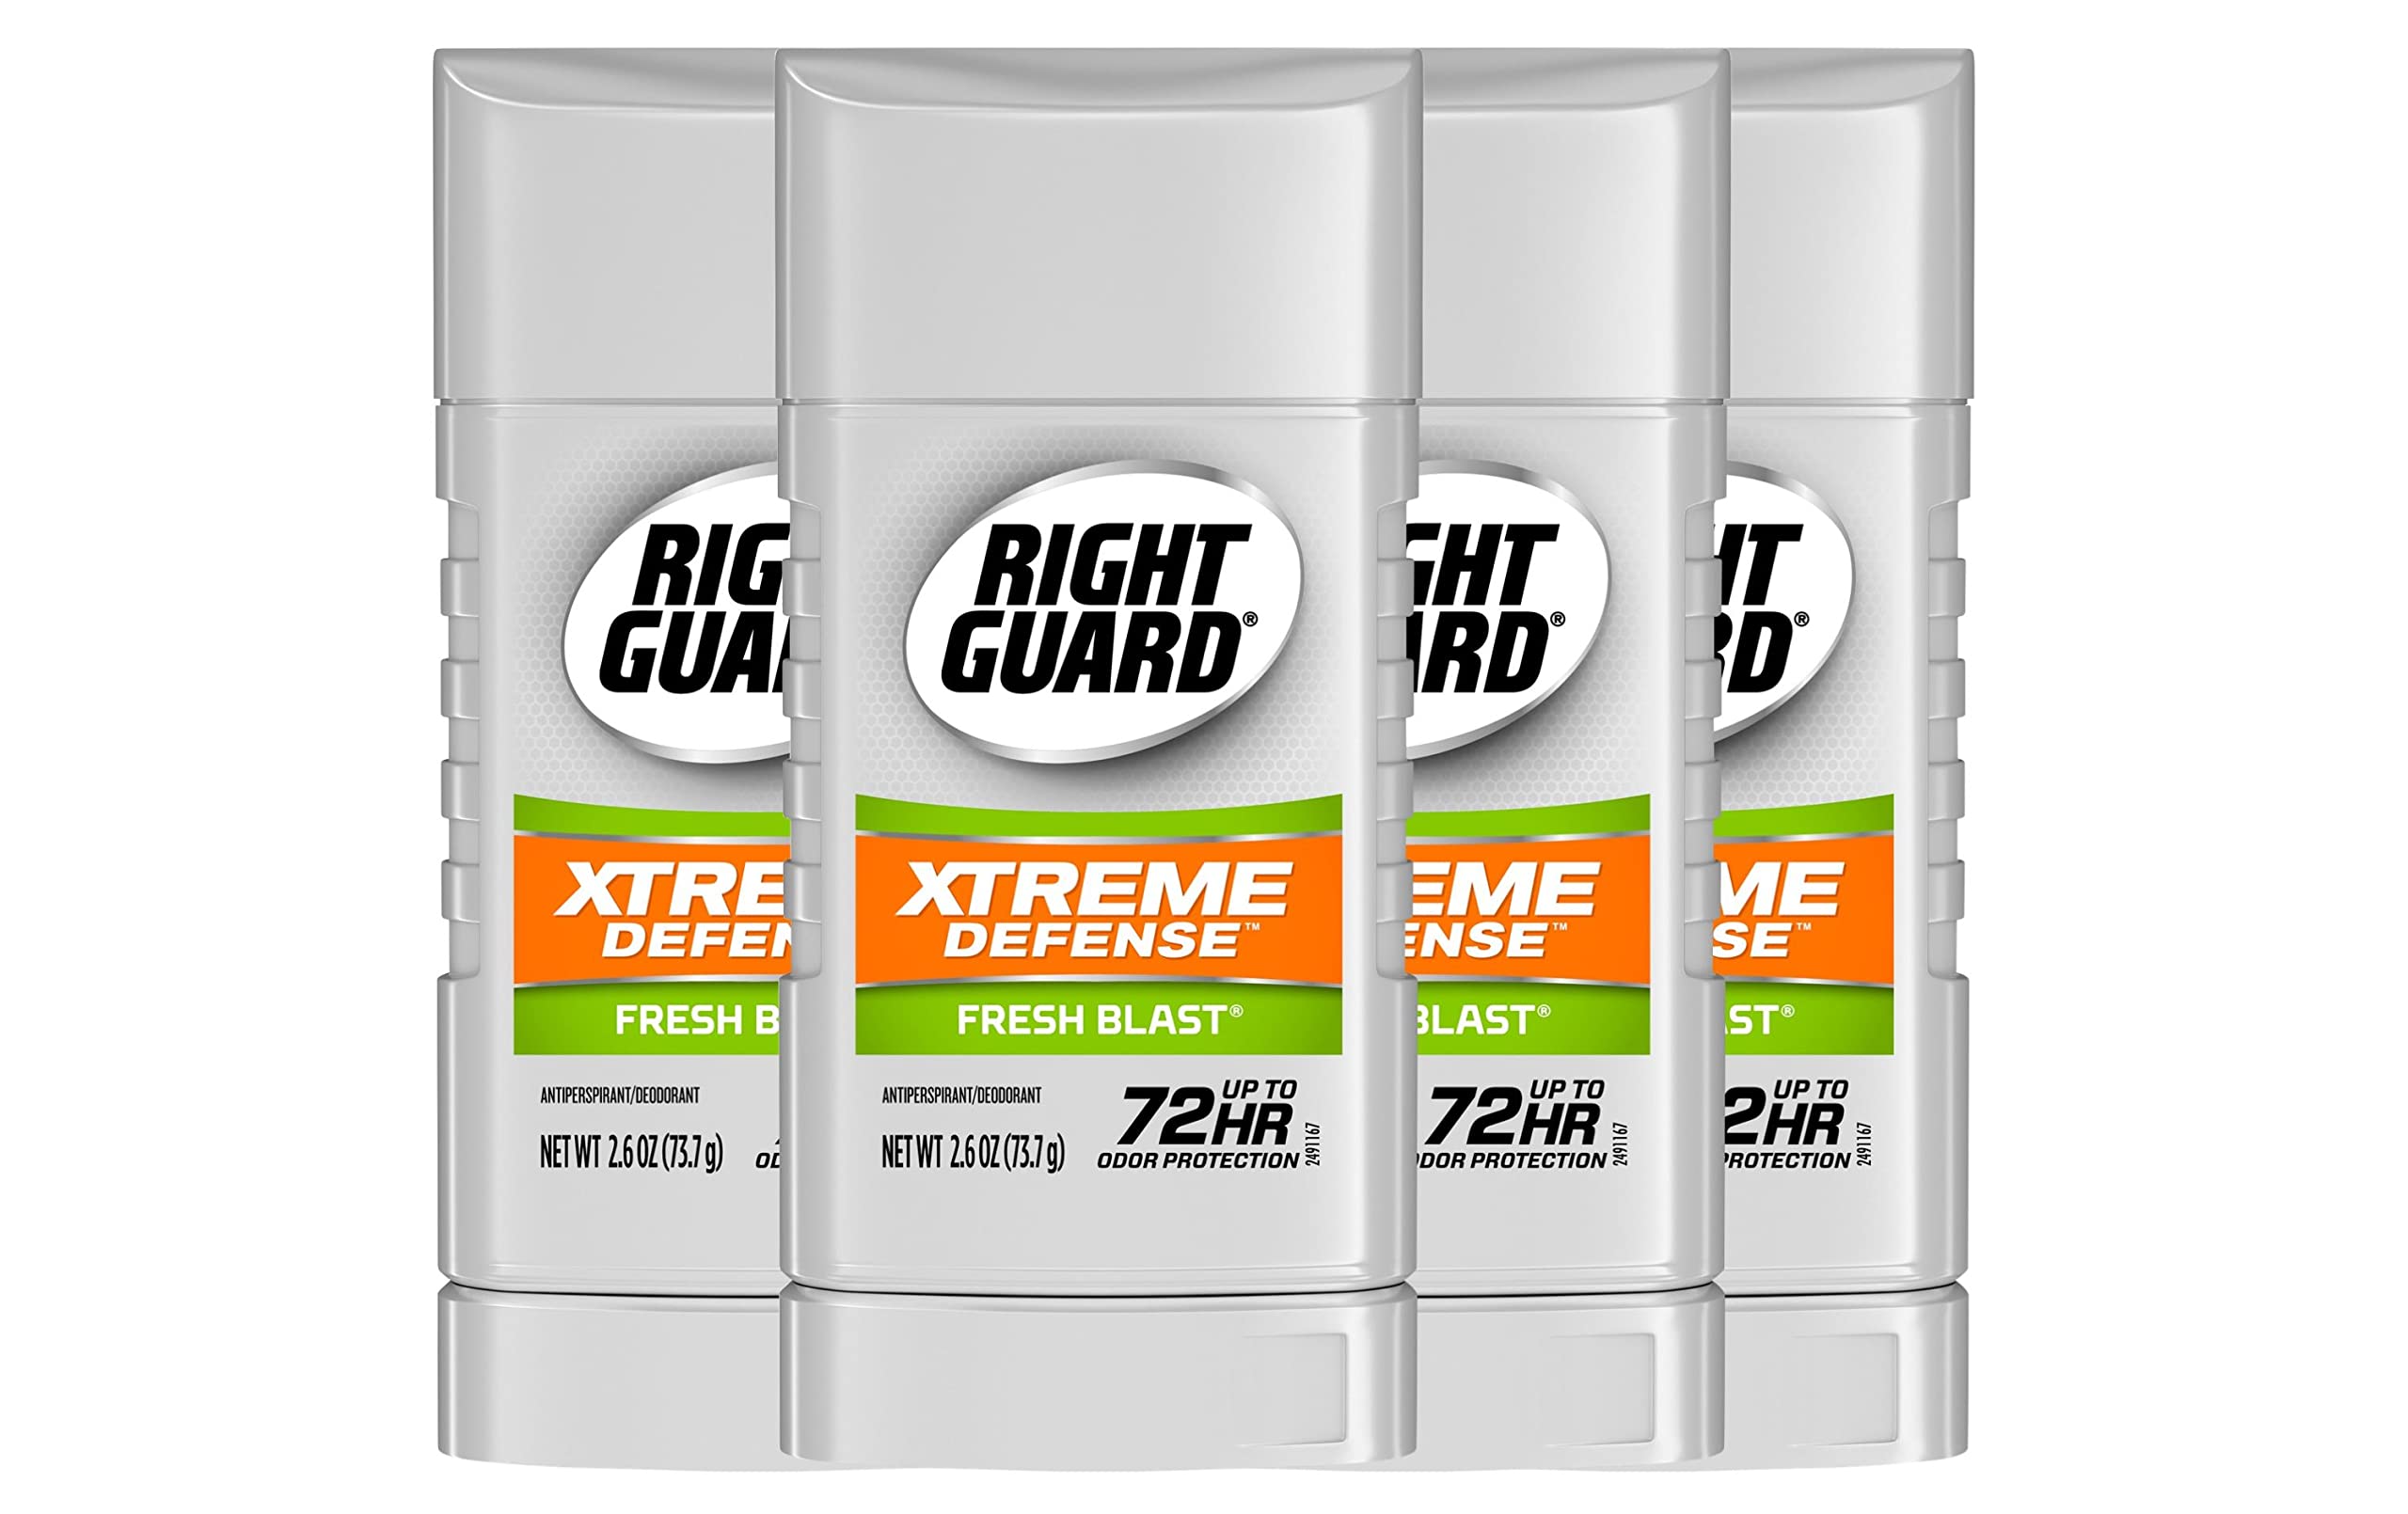 Right Guard Xtreme Defense Antiperspirant Deodorant Solid Stick, Fresh Blast, 2.6 Ounce (Pack of 4)